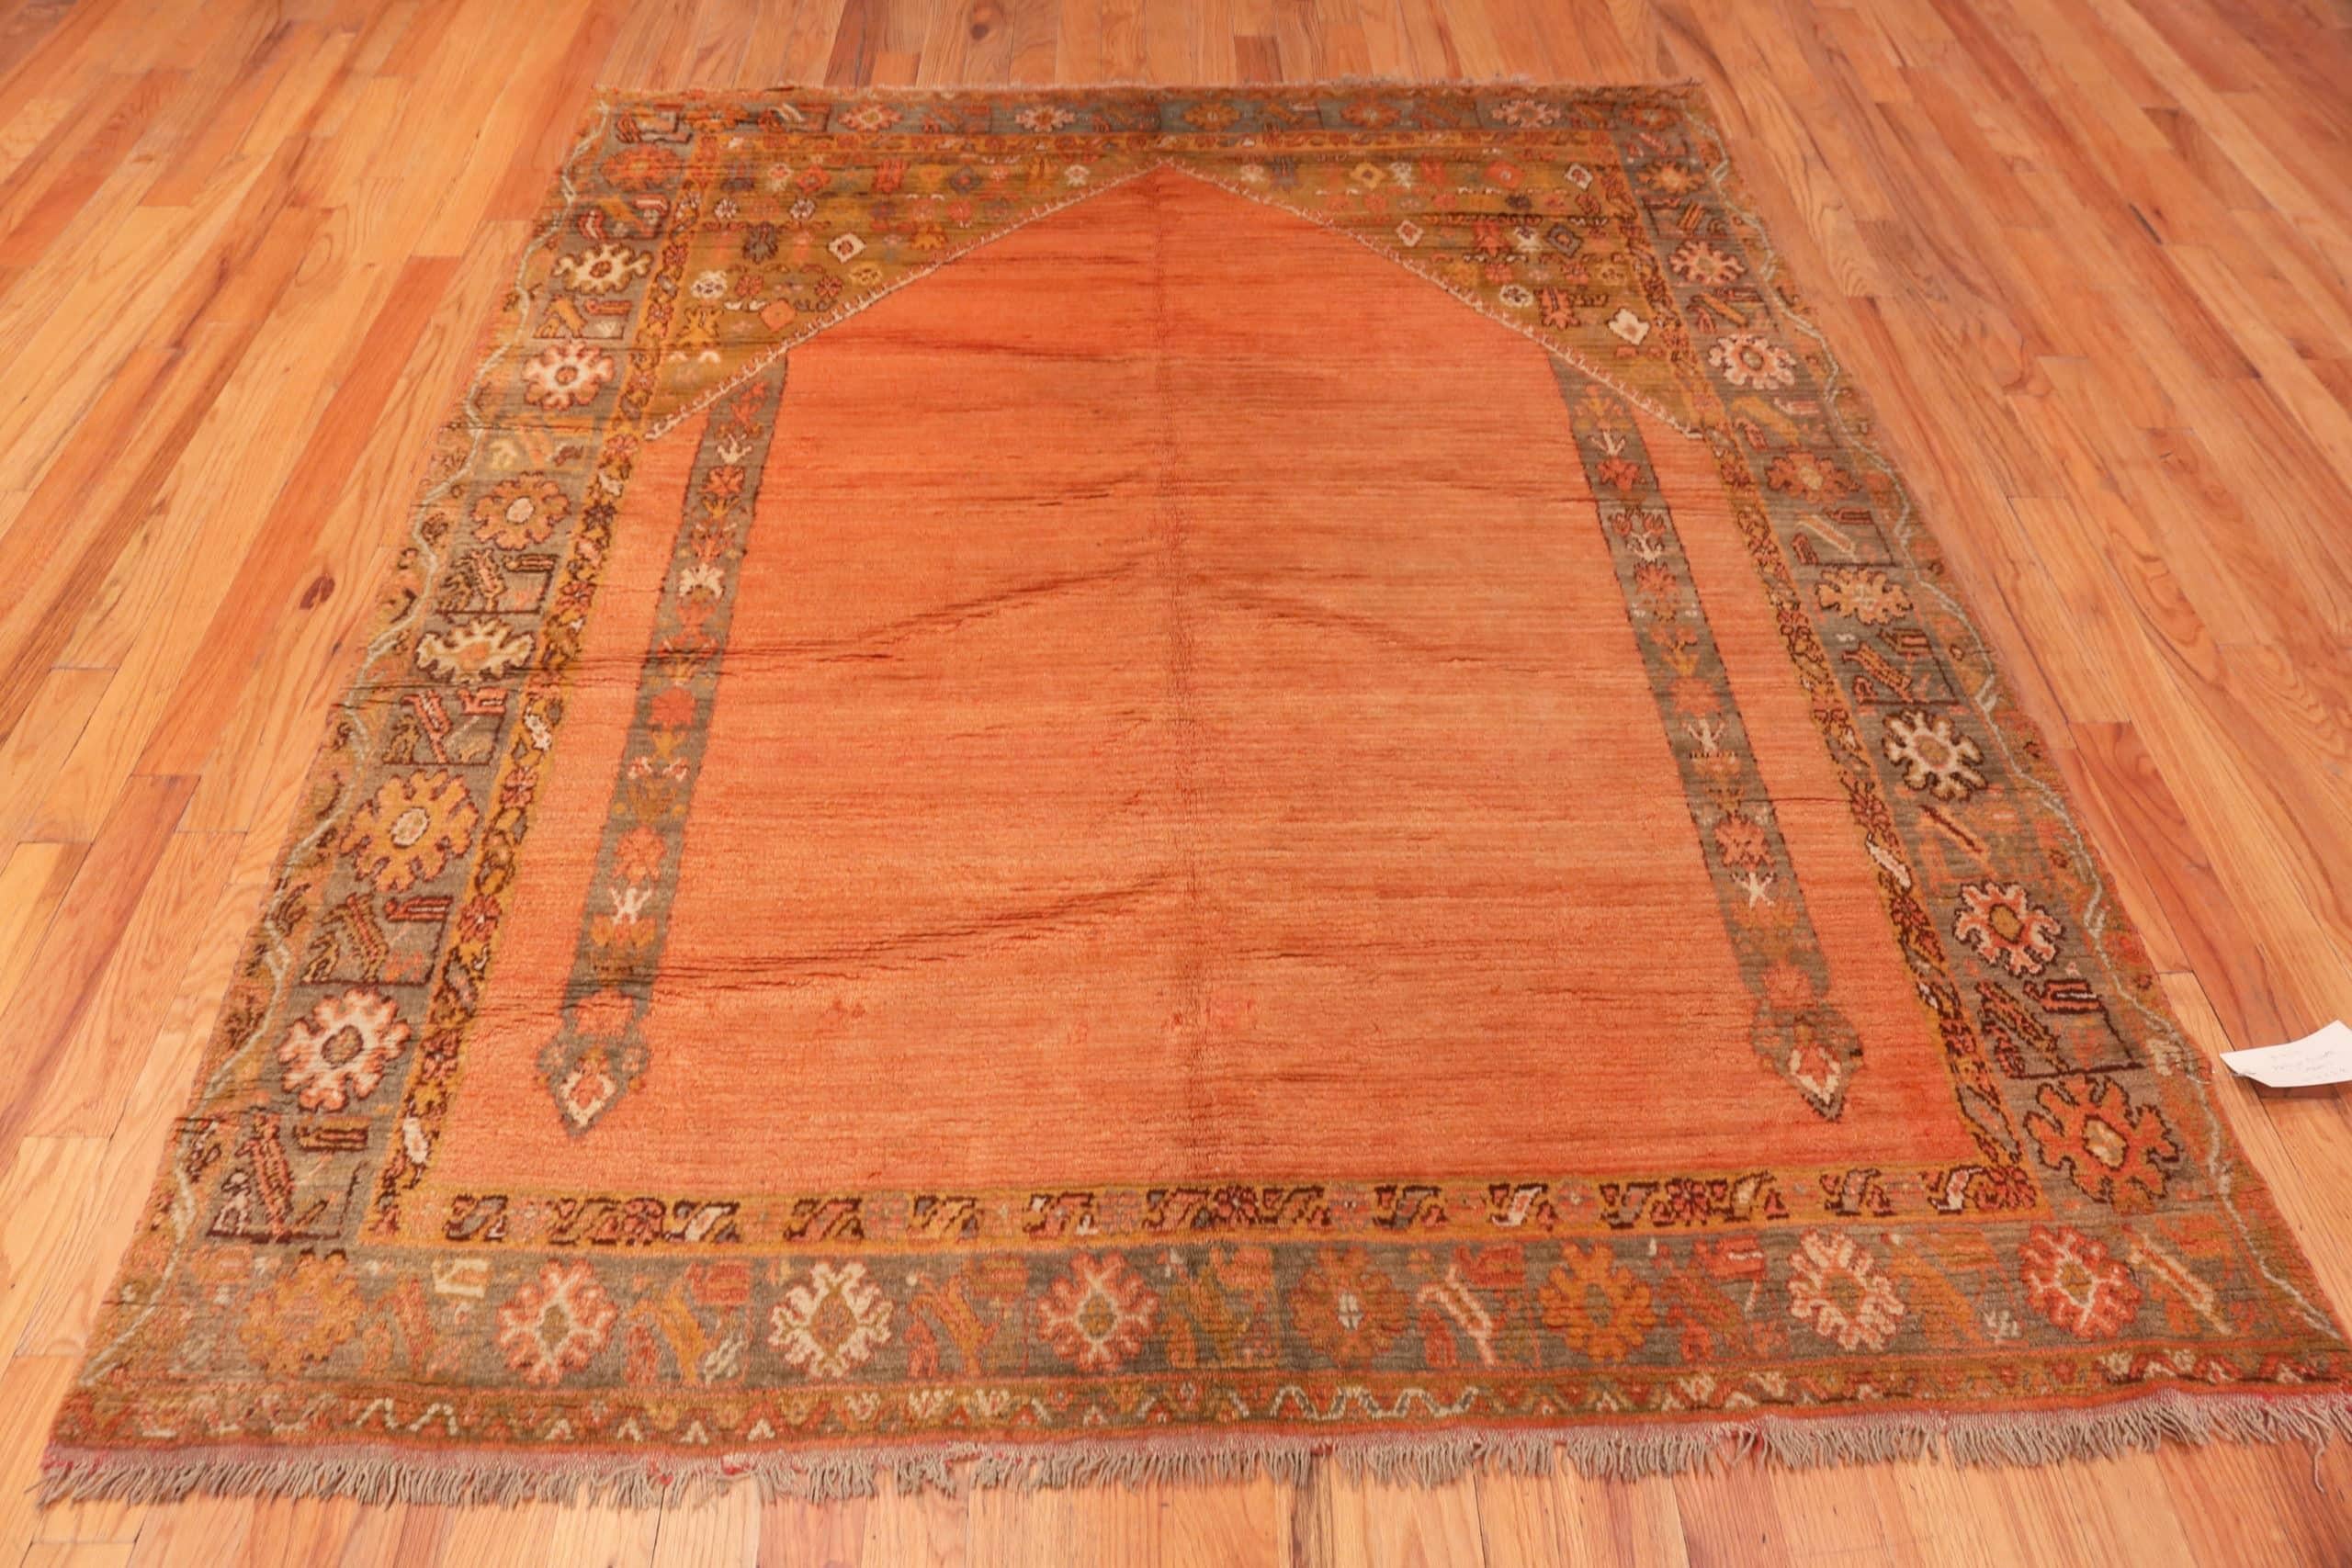 Beautiful Antique Turkish Oushak Prayer Rug, Country of Origin / Rug Type: Turkish Rugs, Circa date: 1920. Size: 6 ft 6 in x 7 ft 8 in (1.98 m x 2.34 m)

